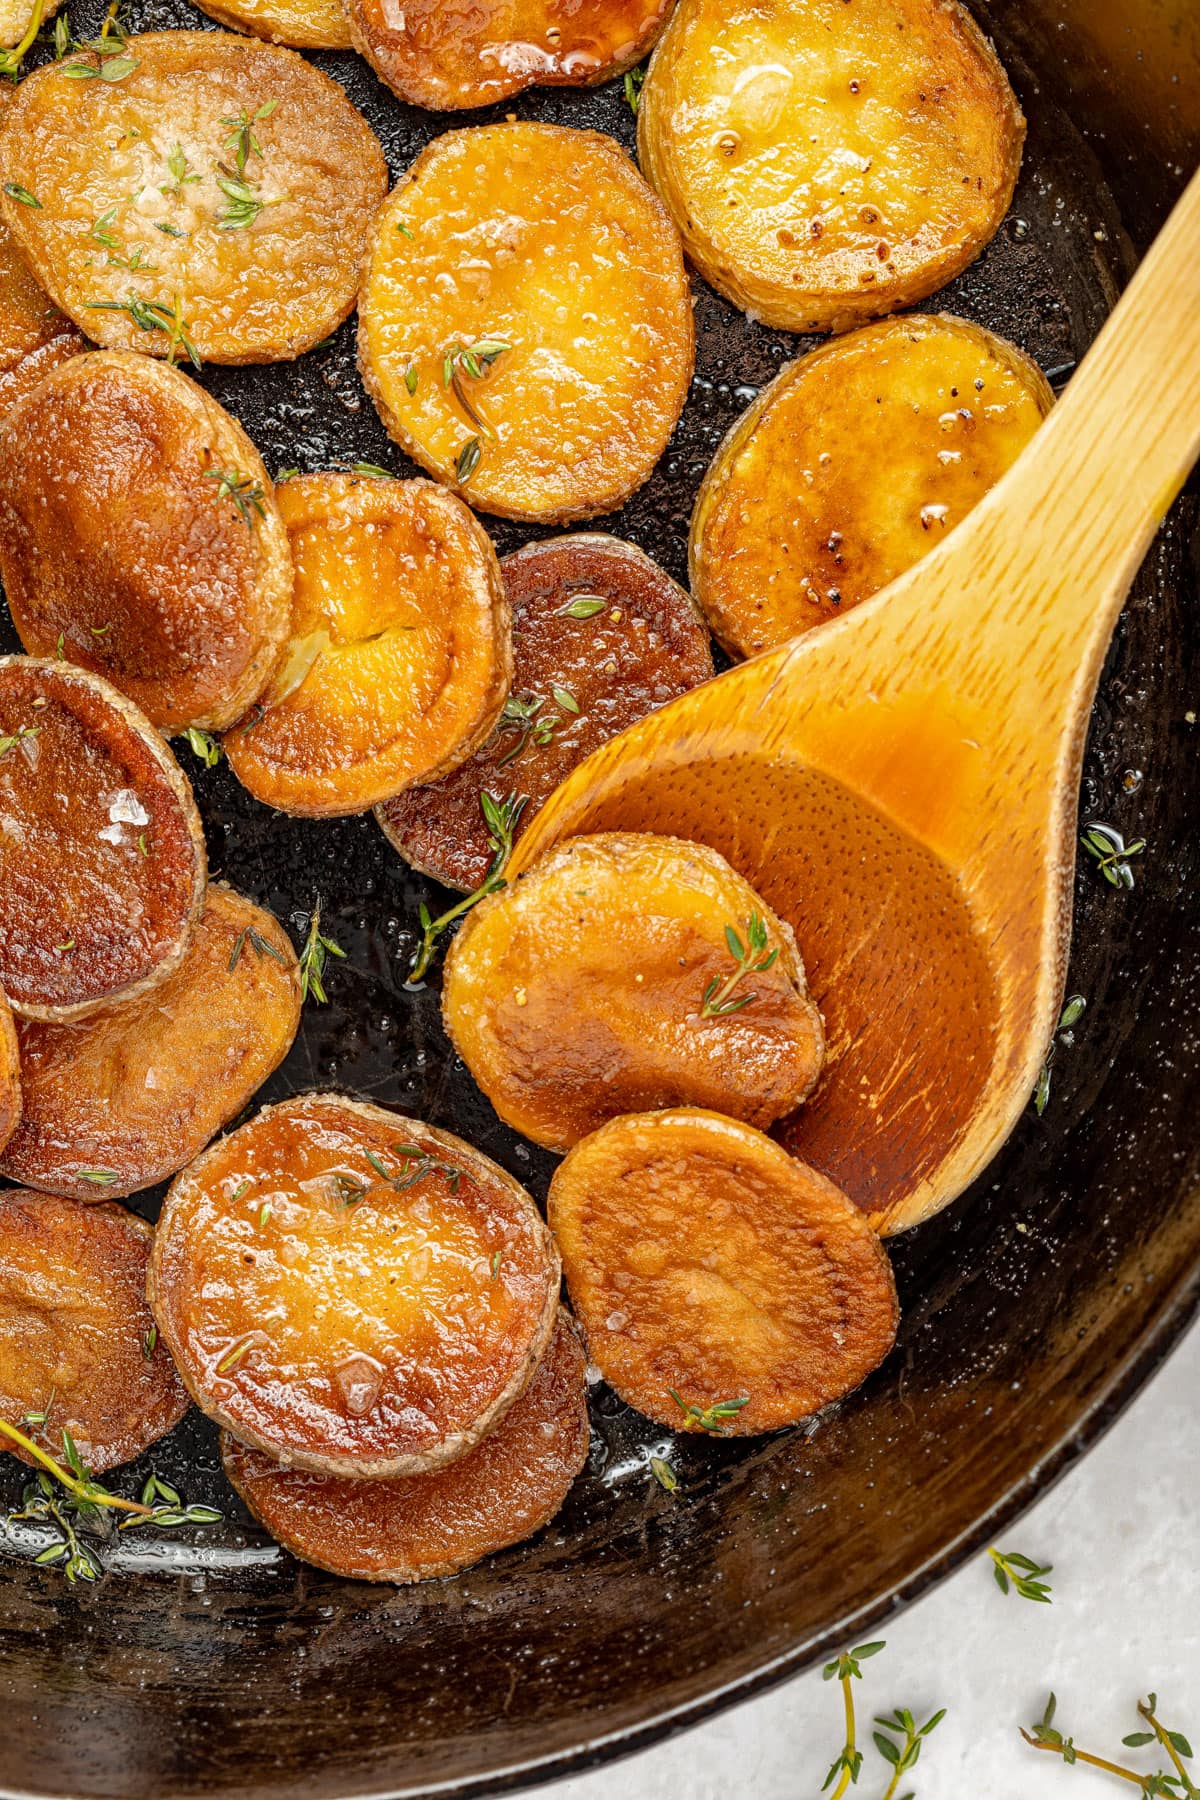 Crispy, pan fried potatoes in a black cast-iron skillet with a wooden spoon.